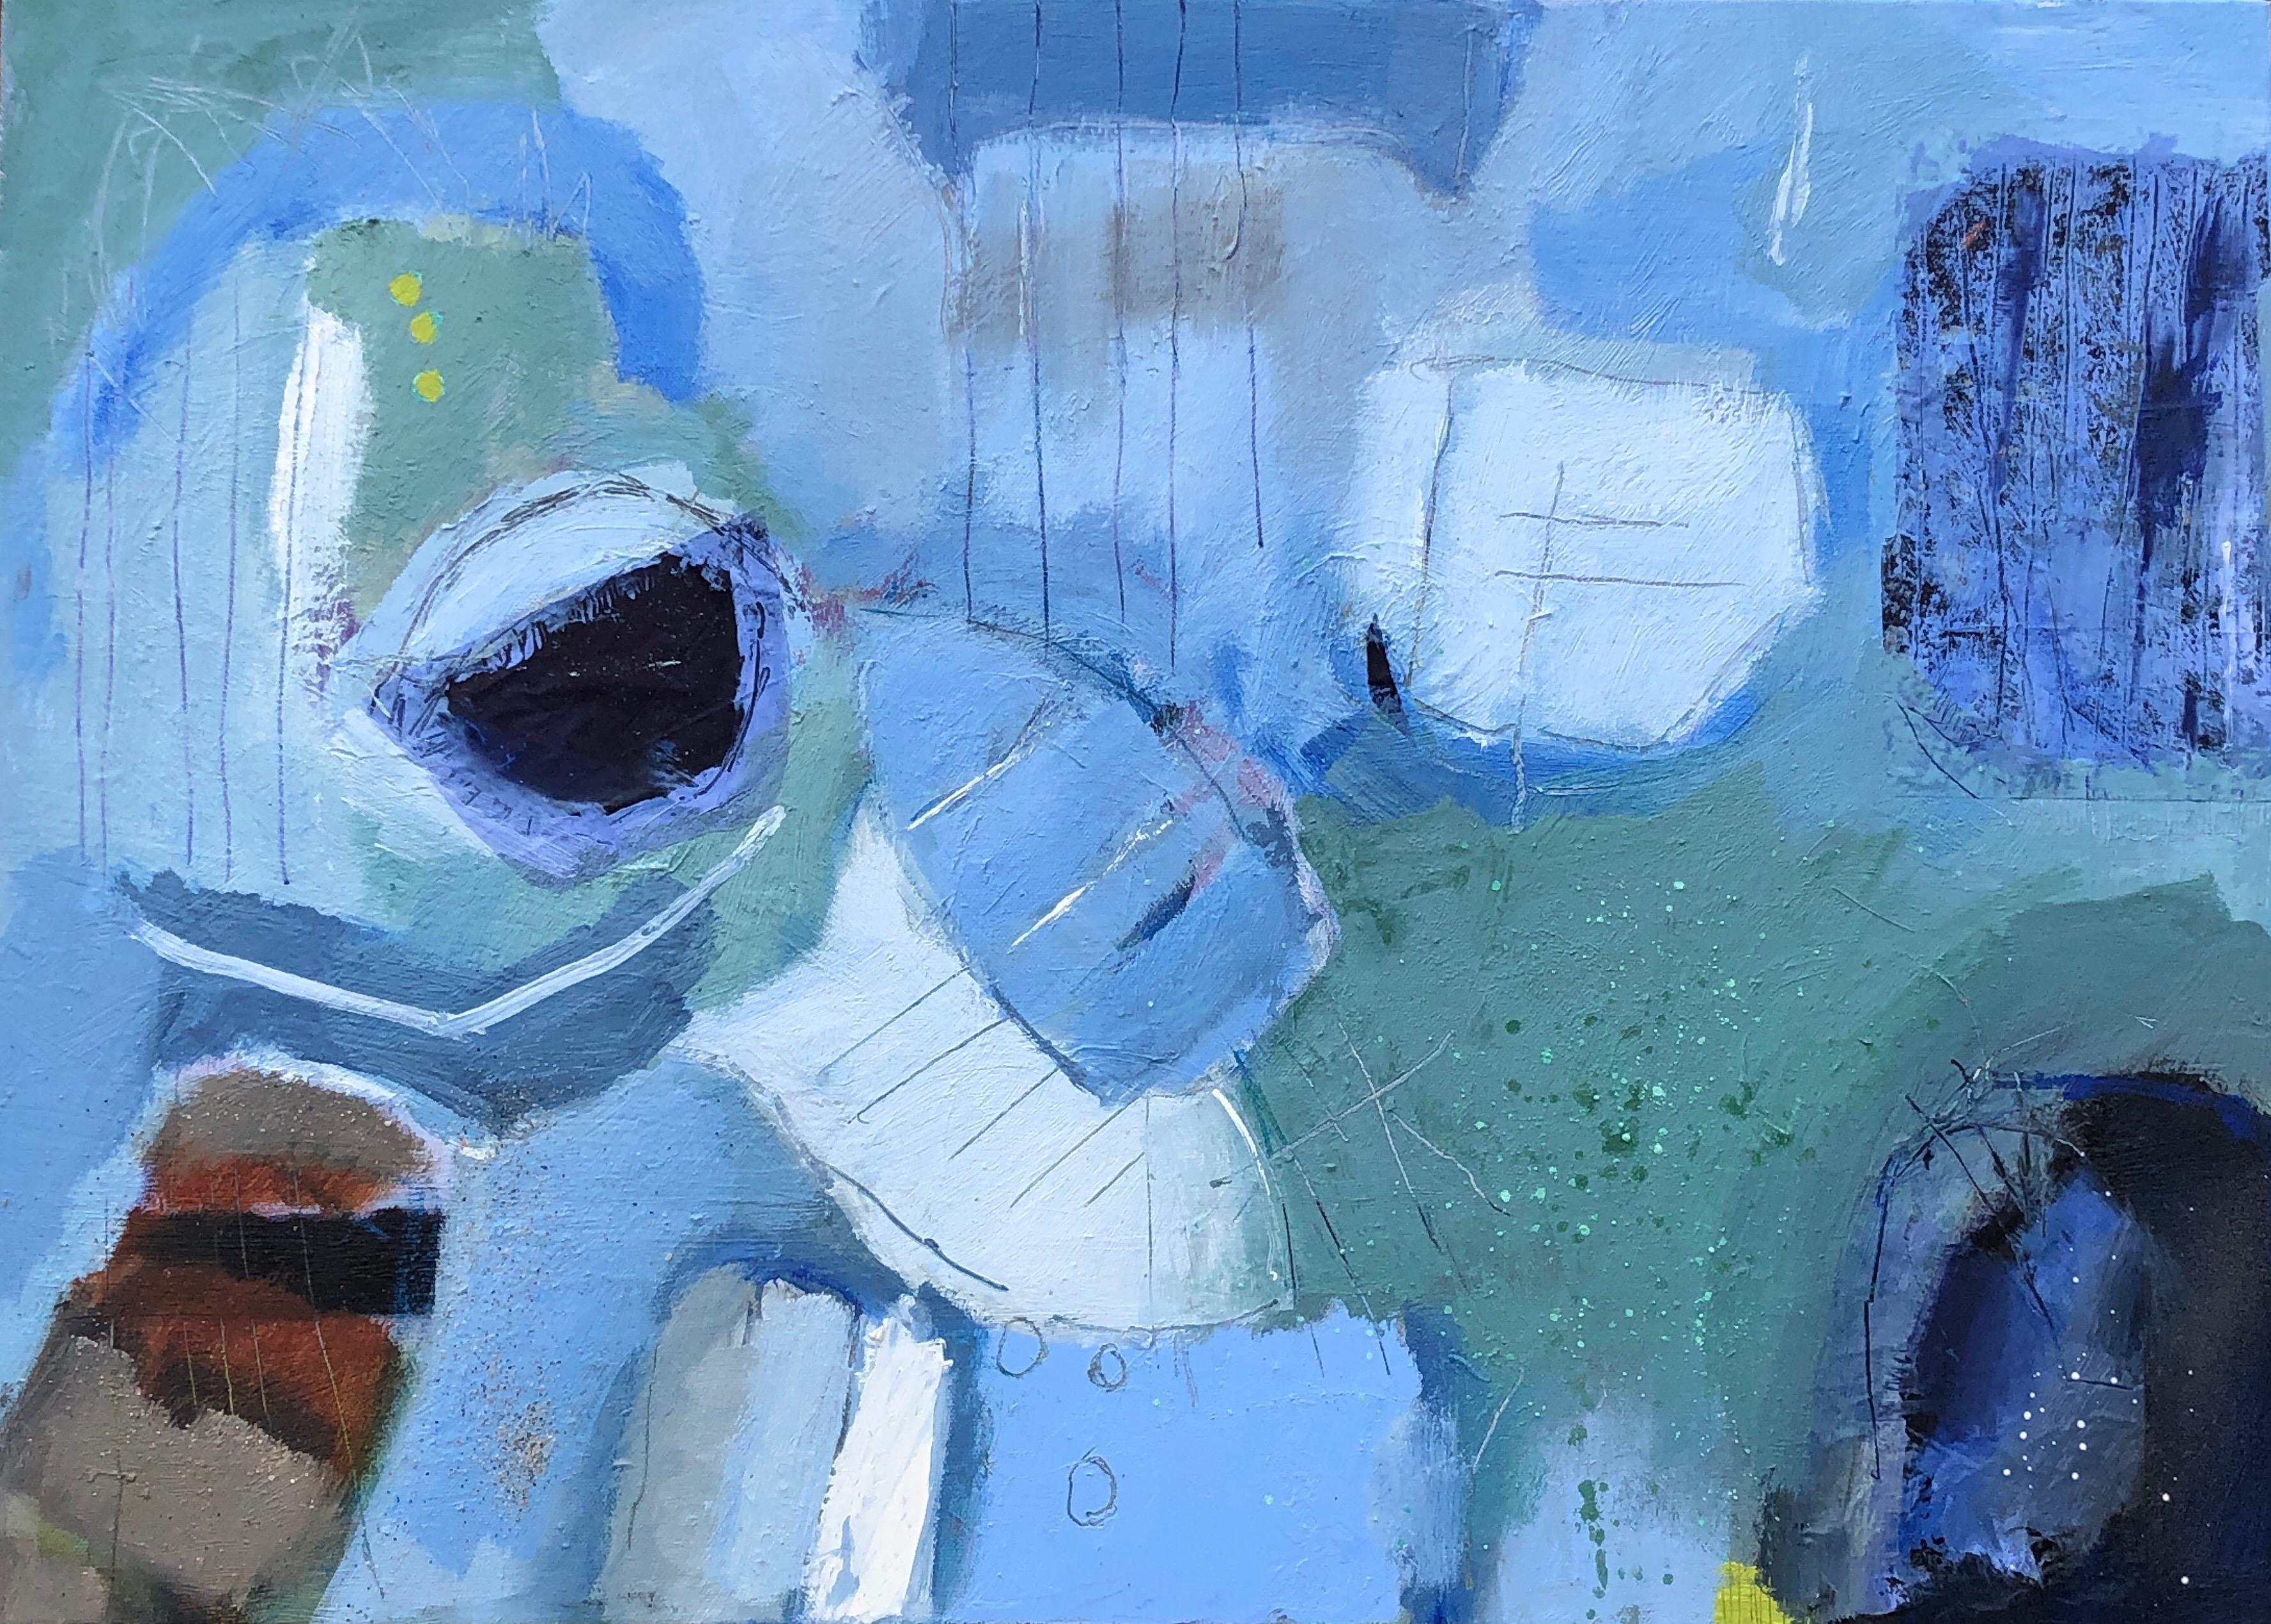 Summer Holidays , Maggie LaPorte Banks
An Abstract landascape, this piece measures 67x 50 cm , oil on canvas , with collage, copper carbonate, carborundum,and sand from St. ives beach and is unframed.
My inspiration for this work comes from spending